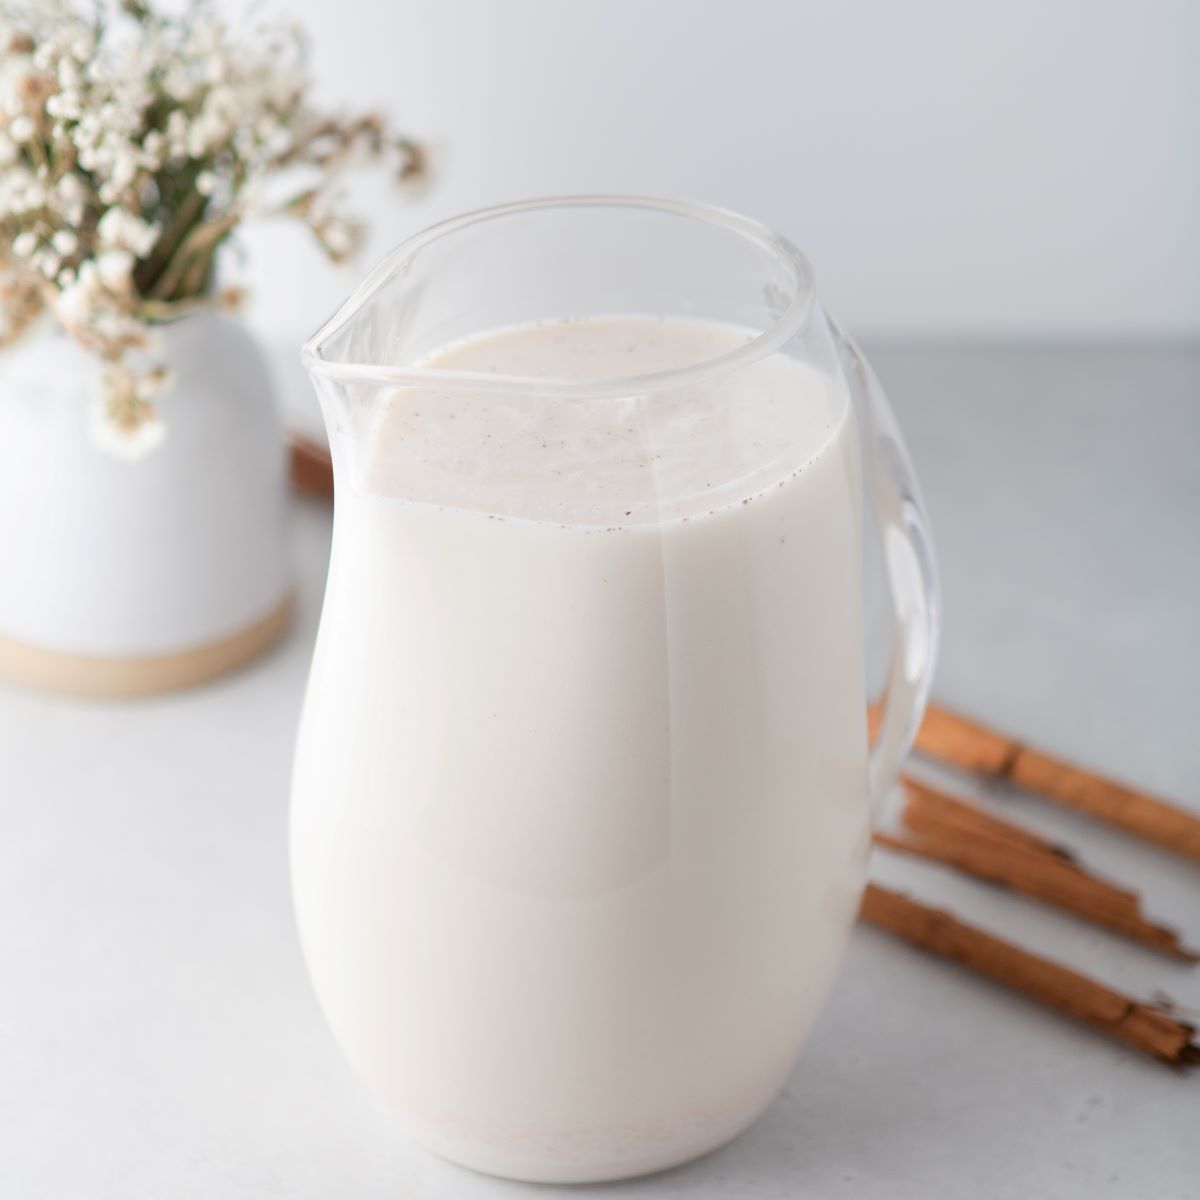 A glass pitcher filled with creamy homemade horchata surrounded by cinnamon sticks.